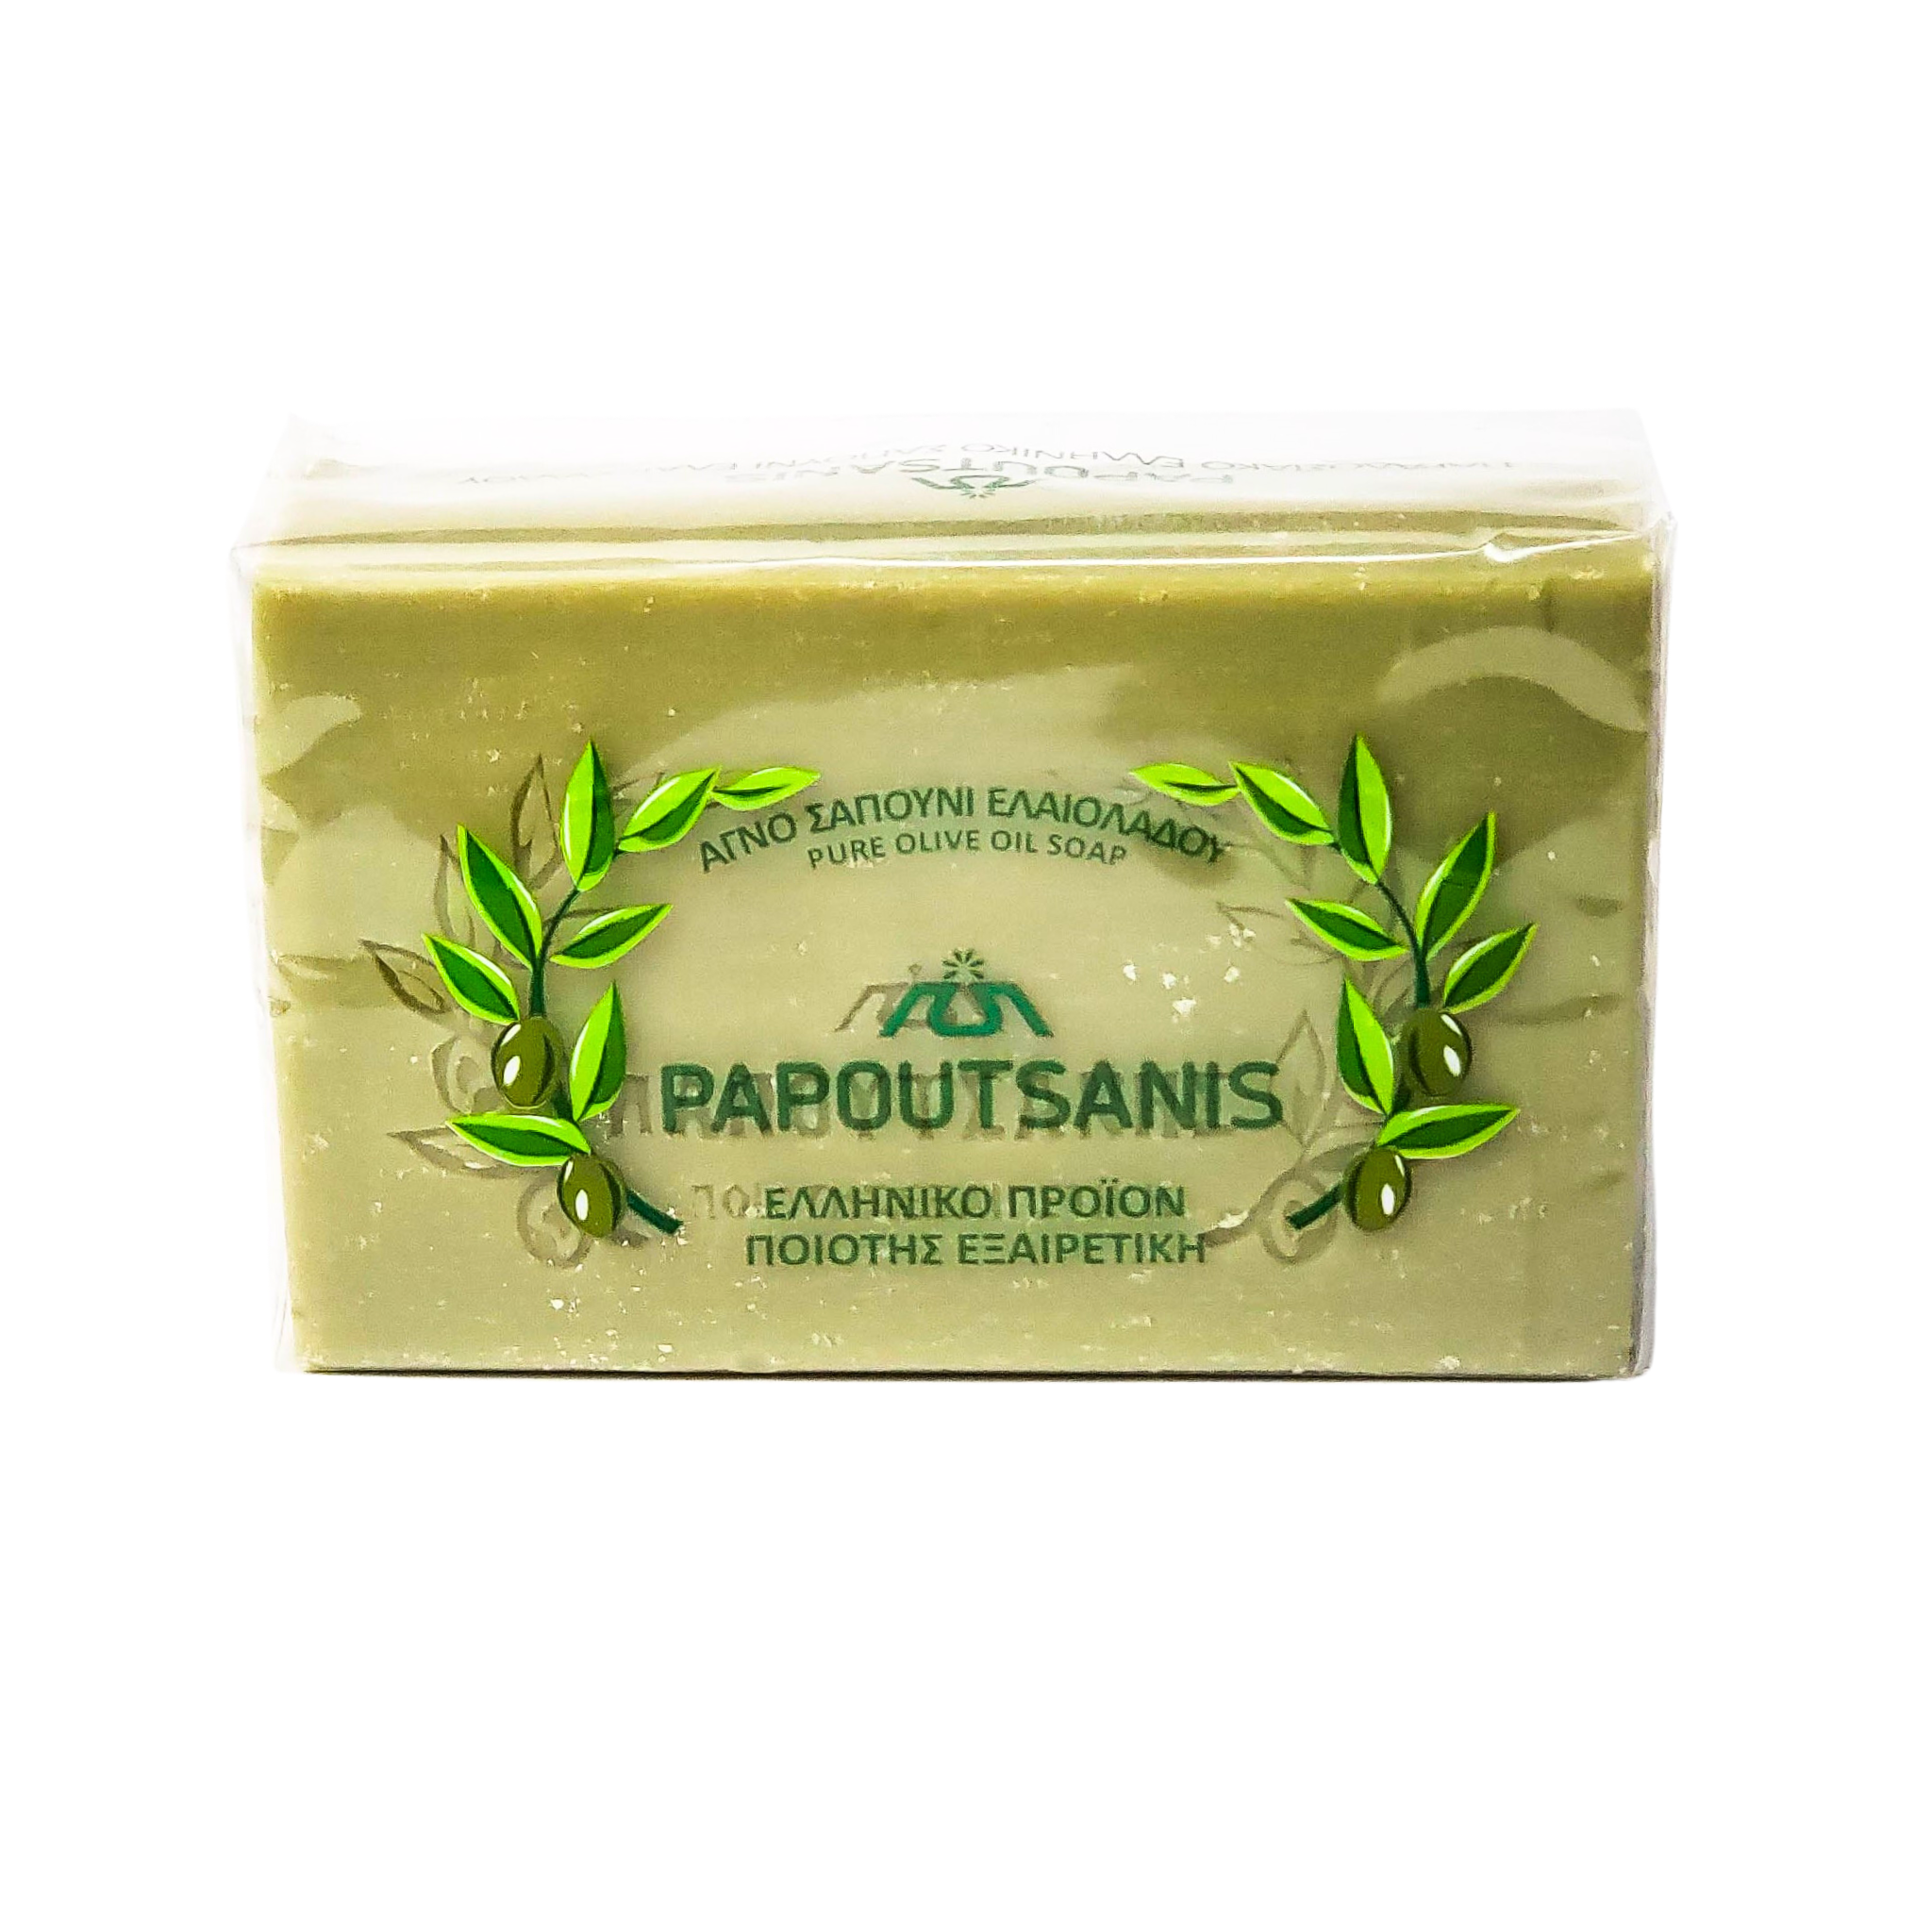 Papoutsanis Pure and Natural Authentic Greek Olive Oil Soap 250g